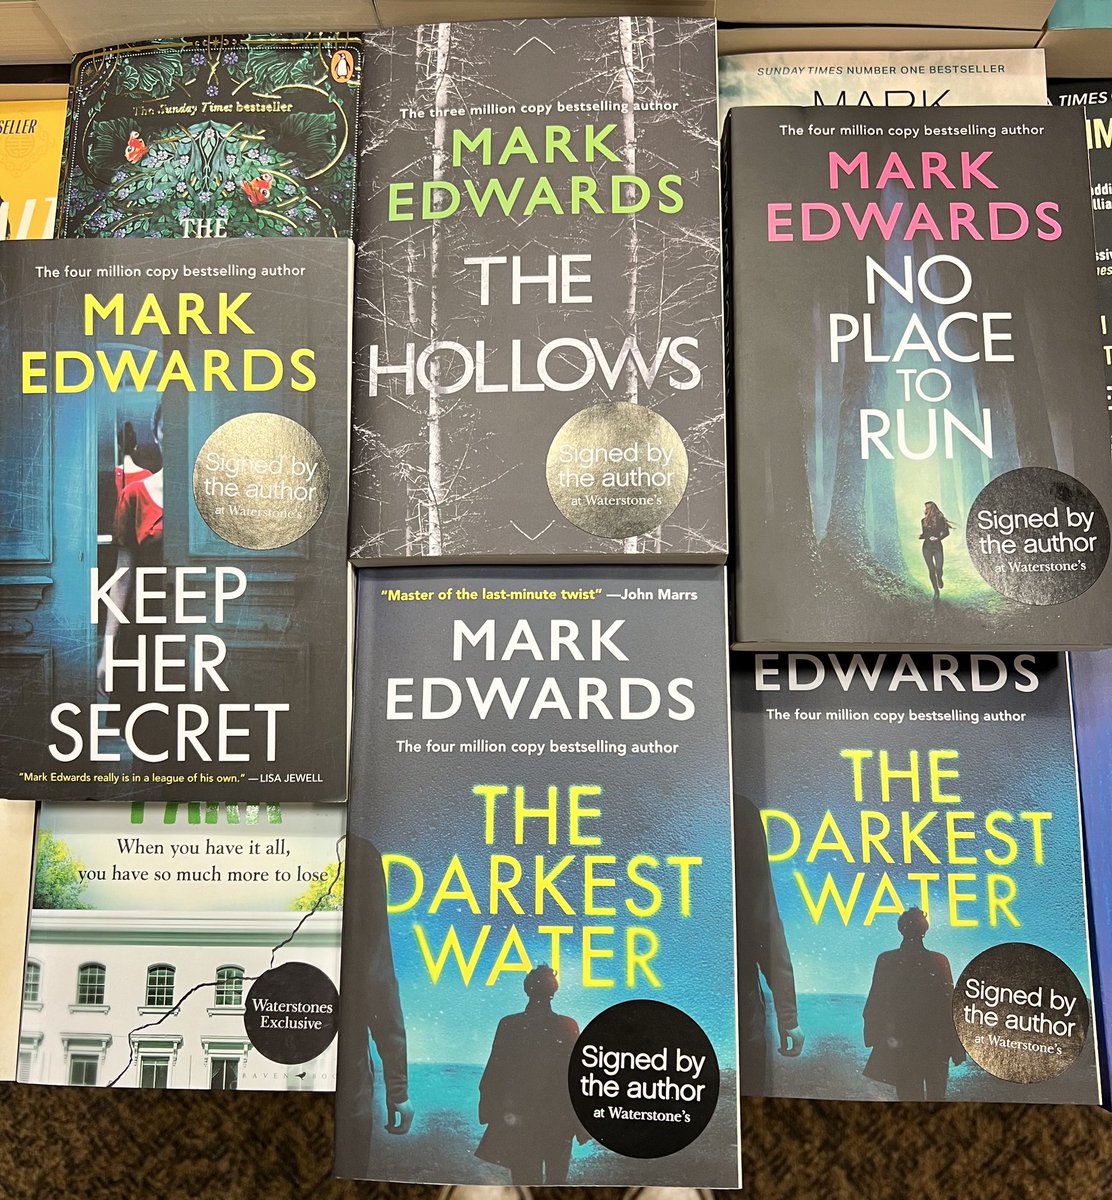 Popped into @WaterstonesWton (Wolverhampton) to sign some books earlier. This is currently the only place to get signed copies of The Darkest Water so if you’re in the area…